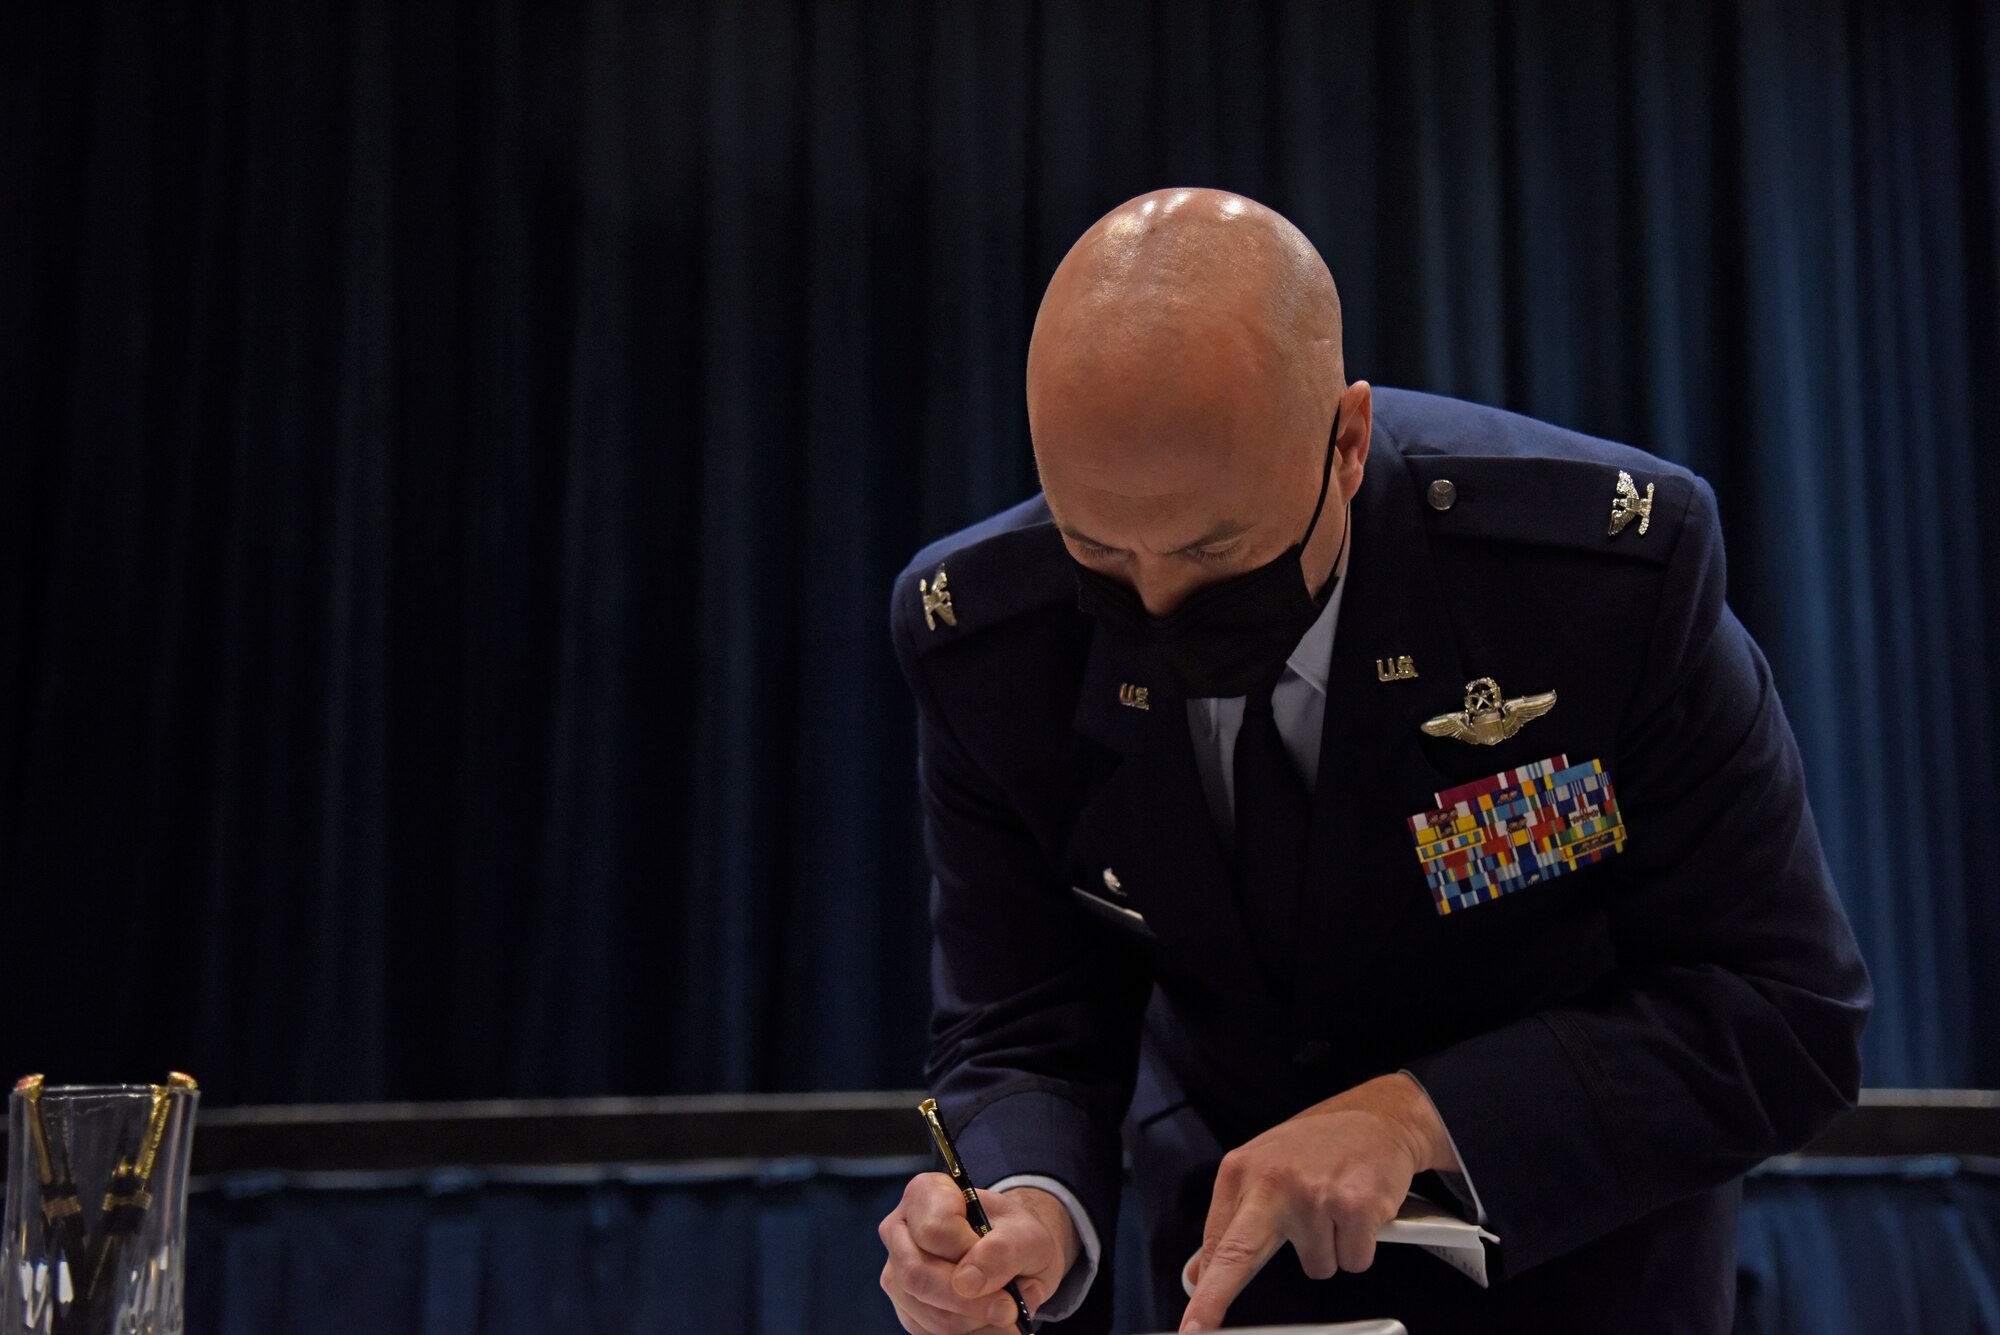 U.S. Air Force Col. Cassius T. Bentley III, 92nd Air Refueling Wing Commander, signs the intergovernmental agreement for a the first-ever Indoor Small Arms Range Partnership on March 15, 2021, Airway Heights, Washington. The signing event culminated an 8-year effort to forge a partnership between the three entities, Fairchild Air Force Base, the Spokane County Sheriff’s Office, and the Spokane County Board of Commissioners. (U.S. Air Force photo by Staff Sgt. Jesenia Landaverde)